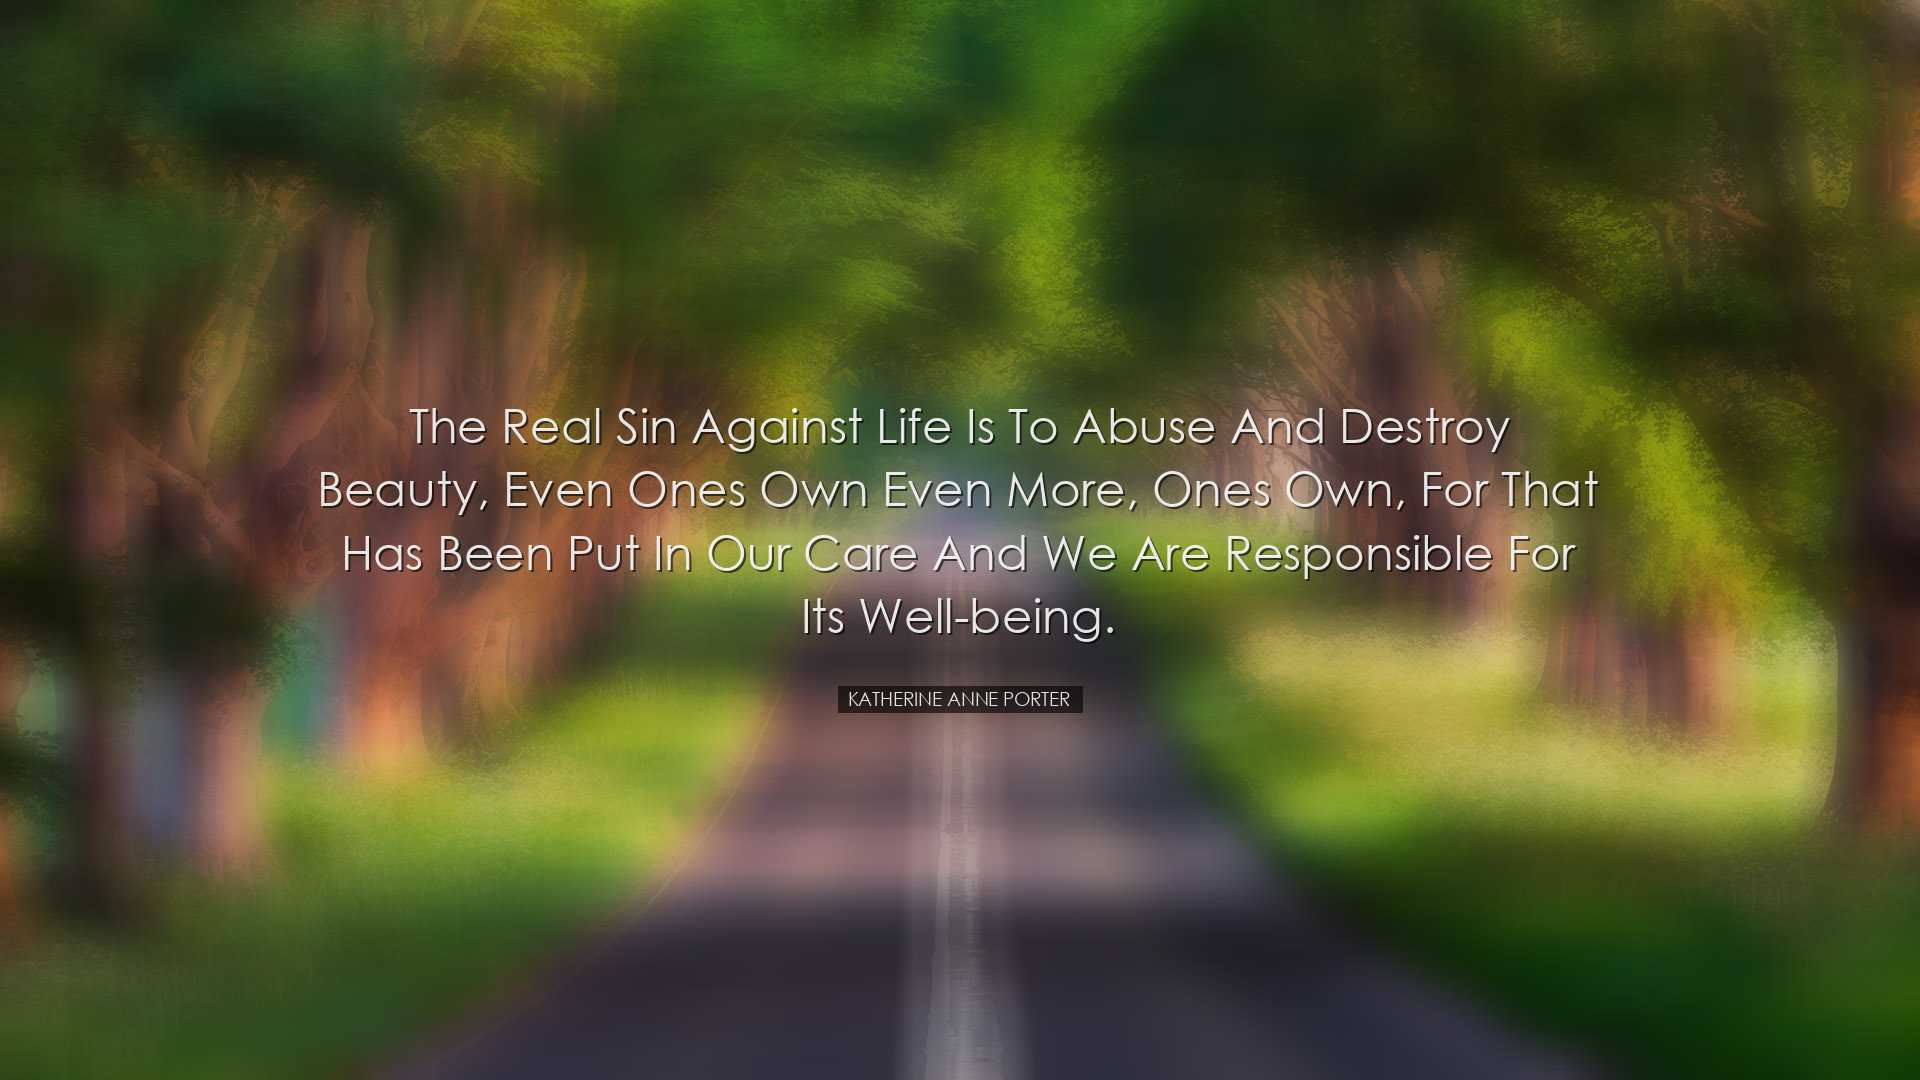 The real sin against life is to abuse and destroy beauty, even one